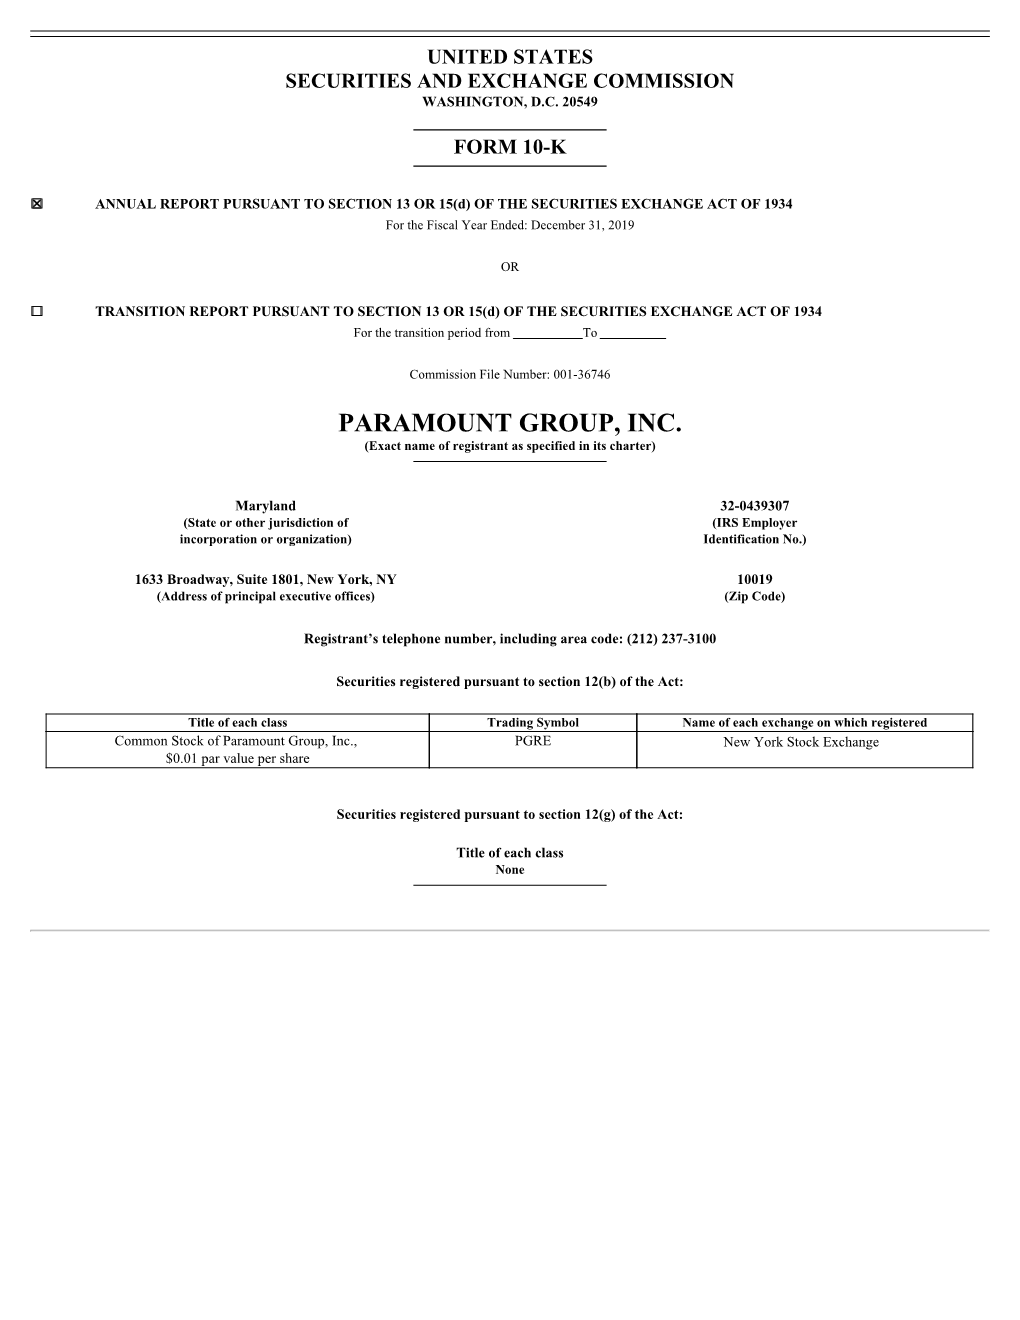 PARAMOUNT GROUP, INC. (Exact Name of Registrant As Specified in Its Charter)